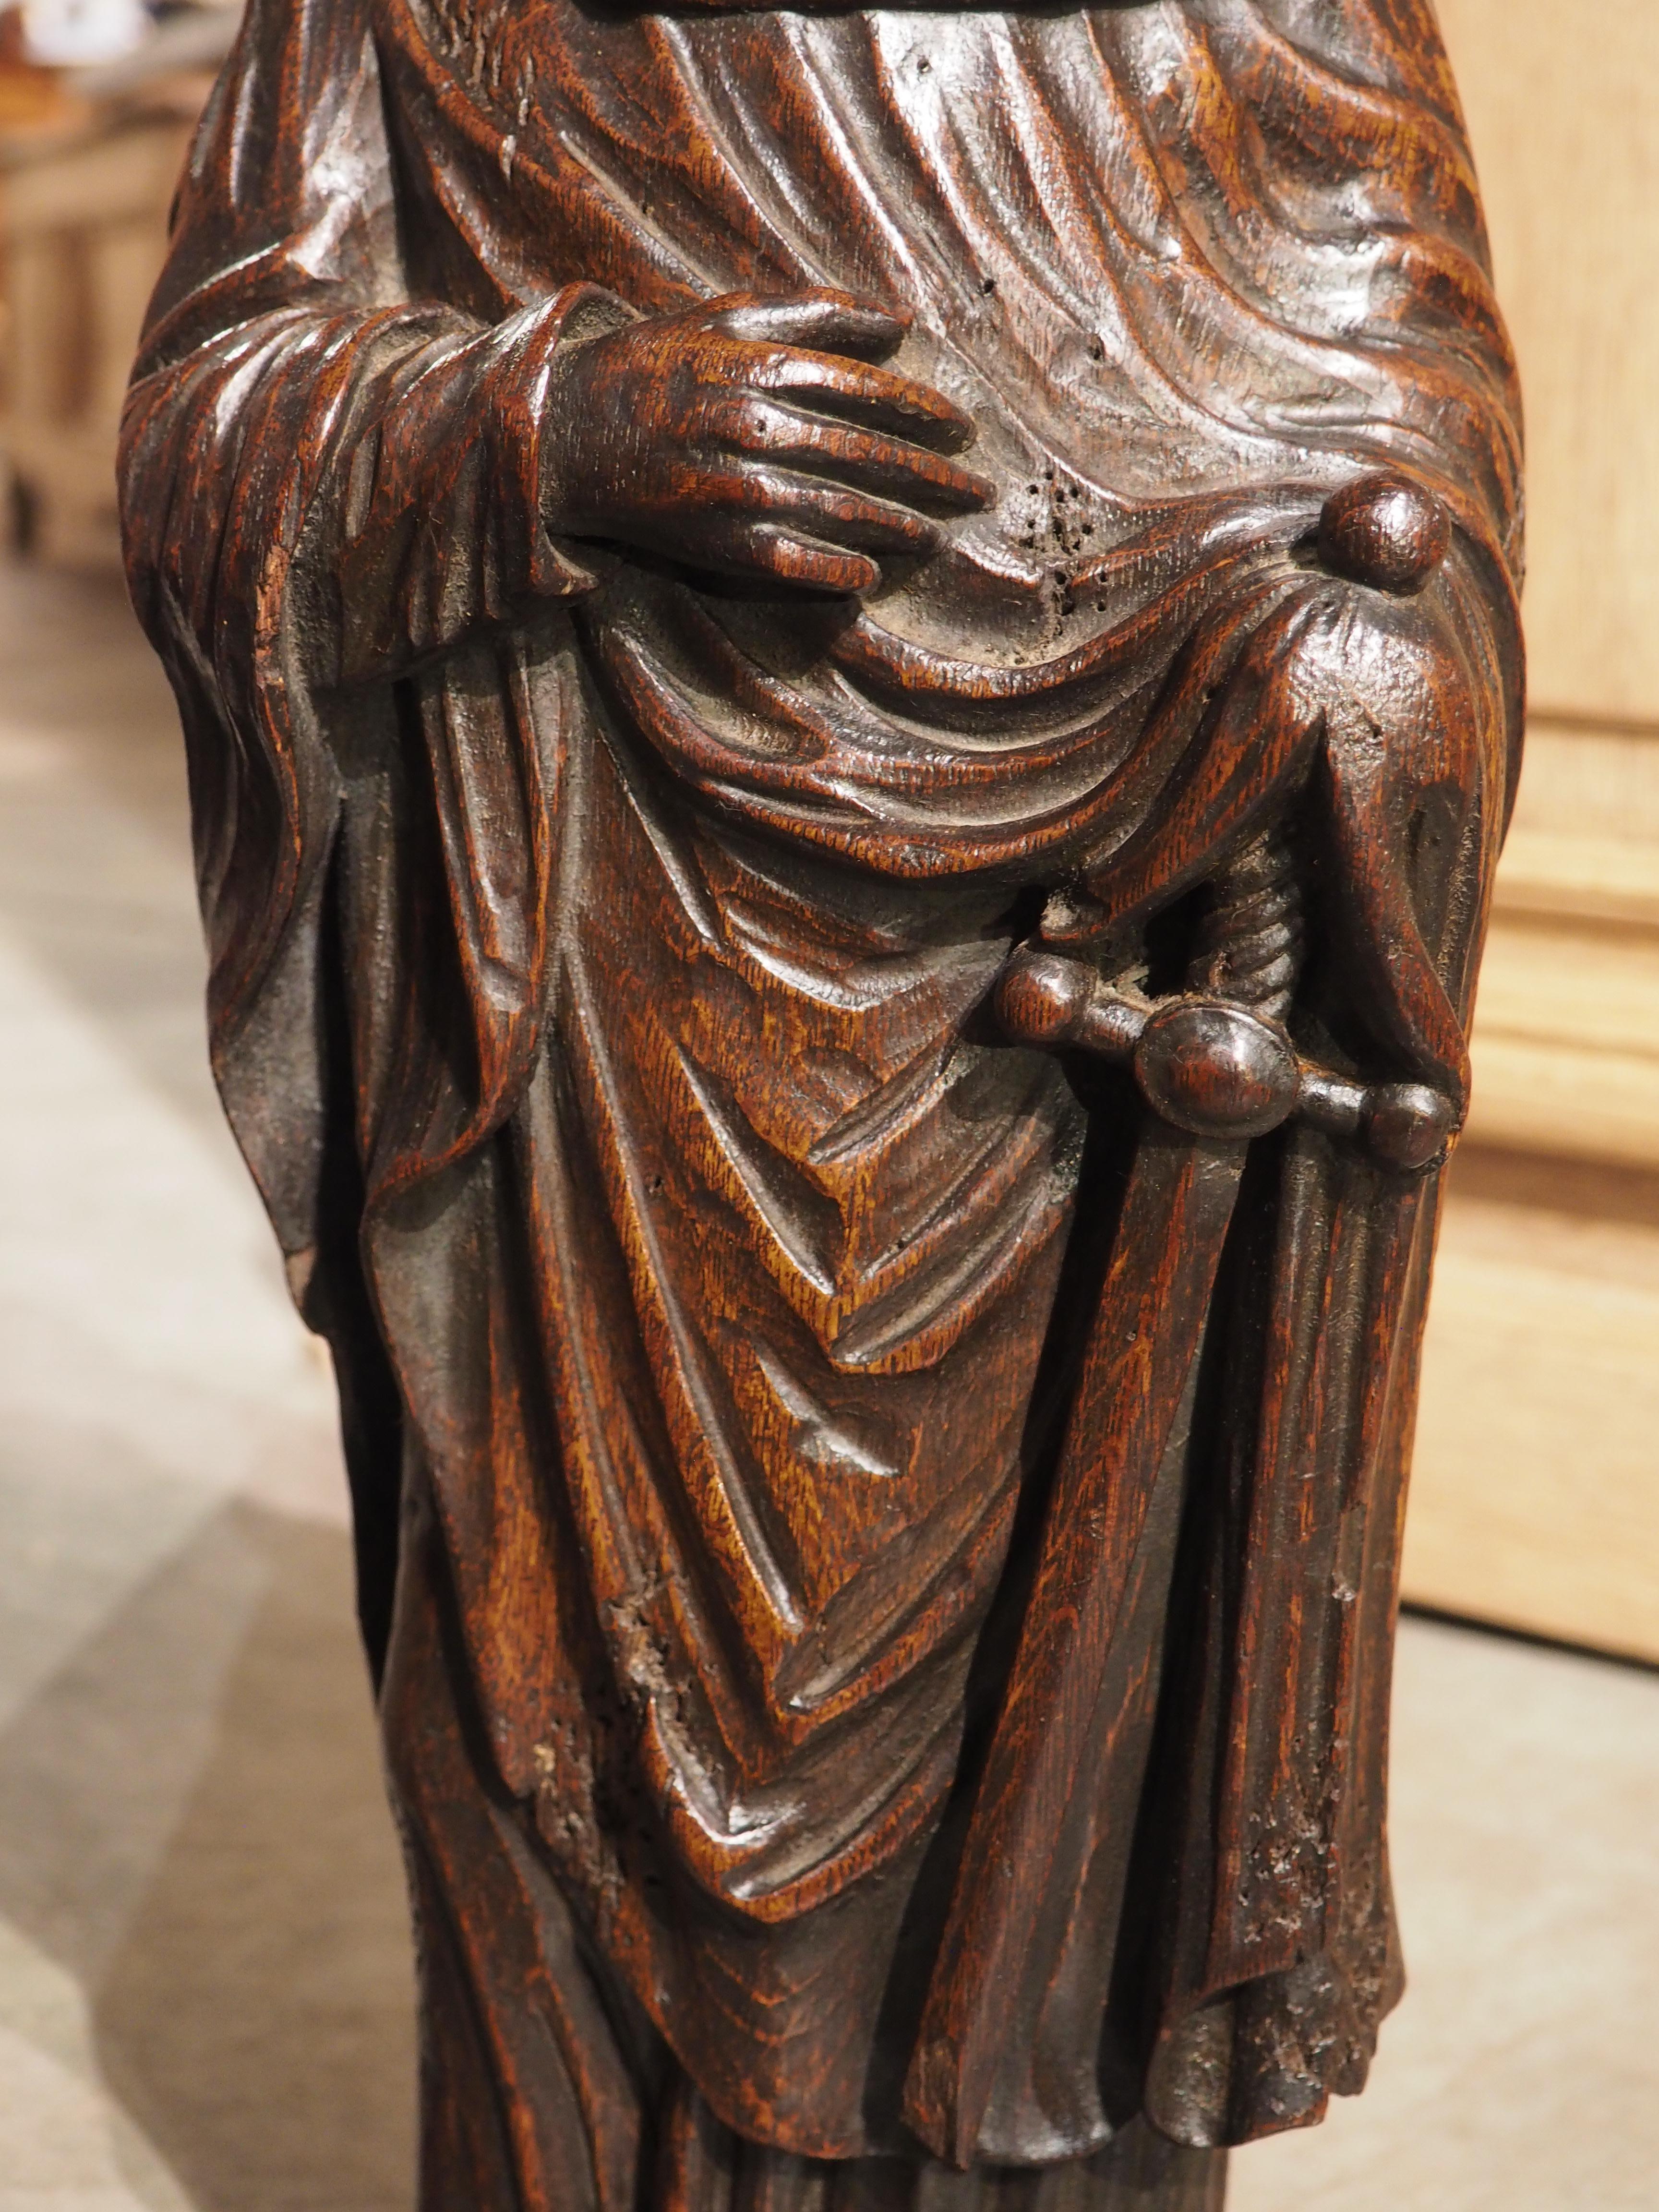 Circa 1800 Carved Oak Sculptures of the Apostles, James, John, Peter, and Paul For Sale 3